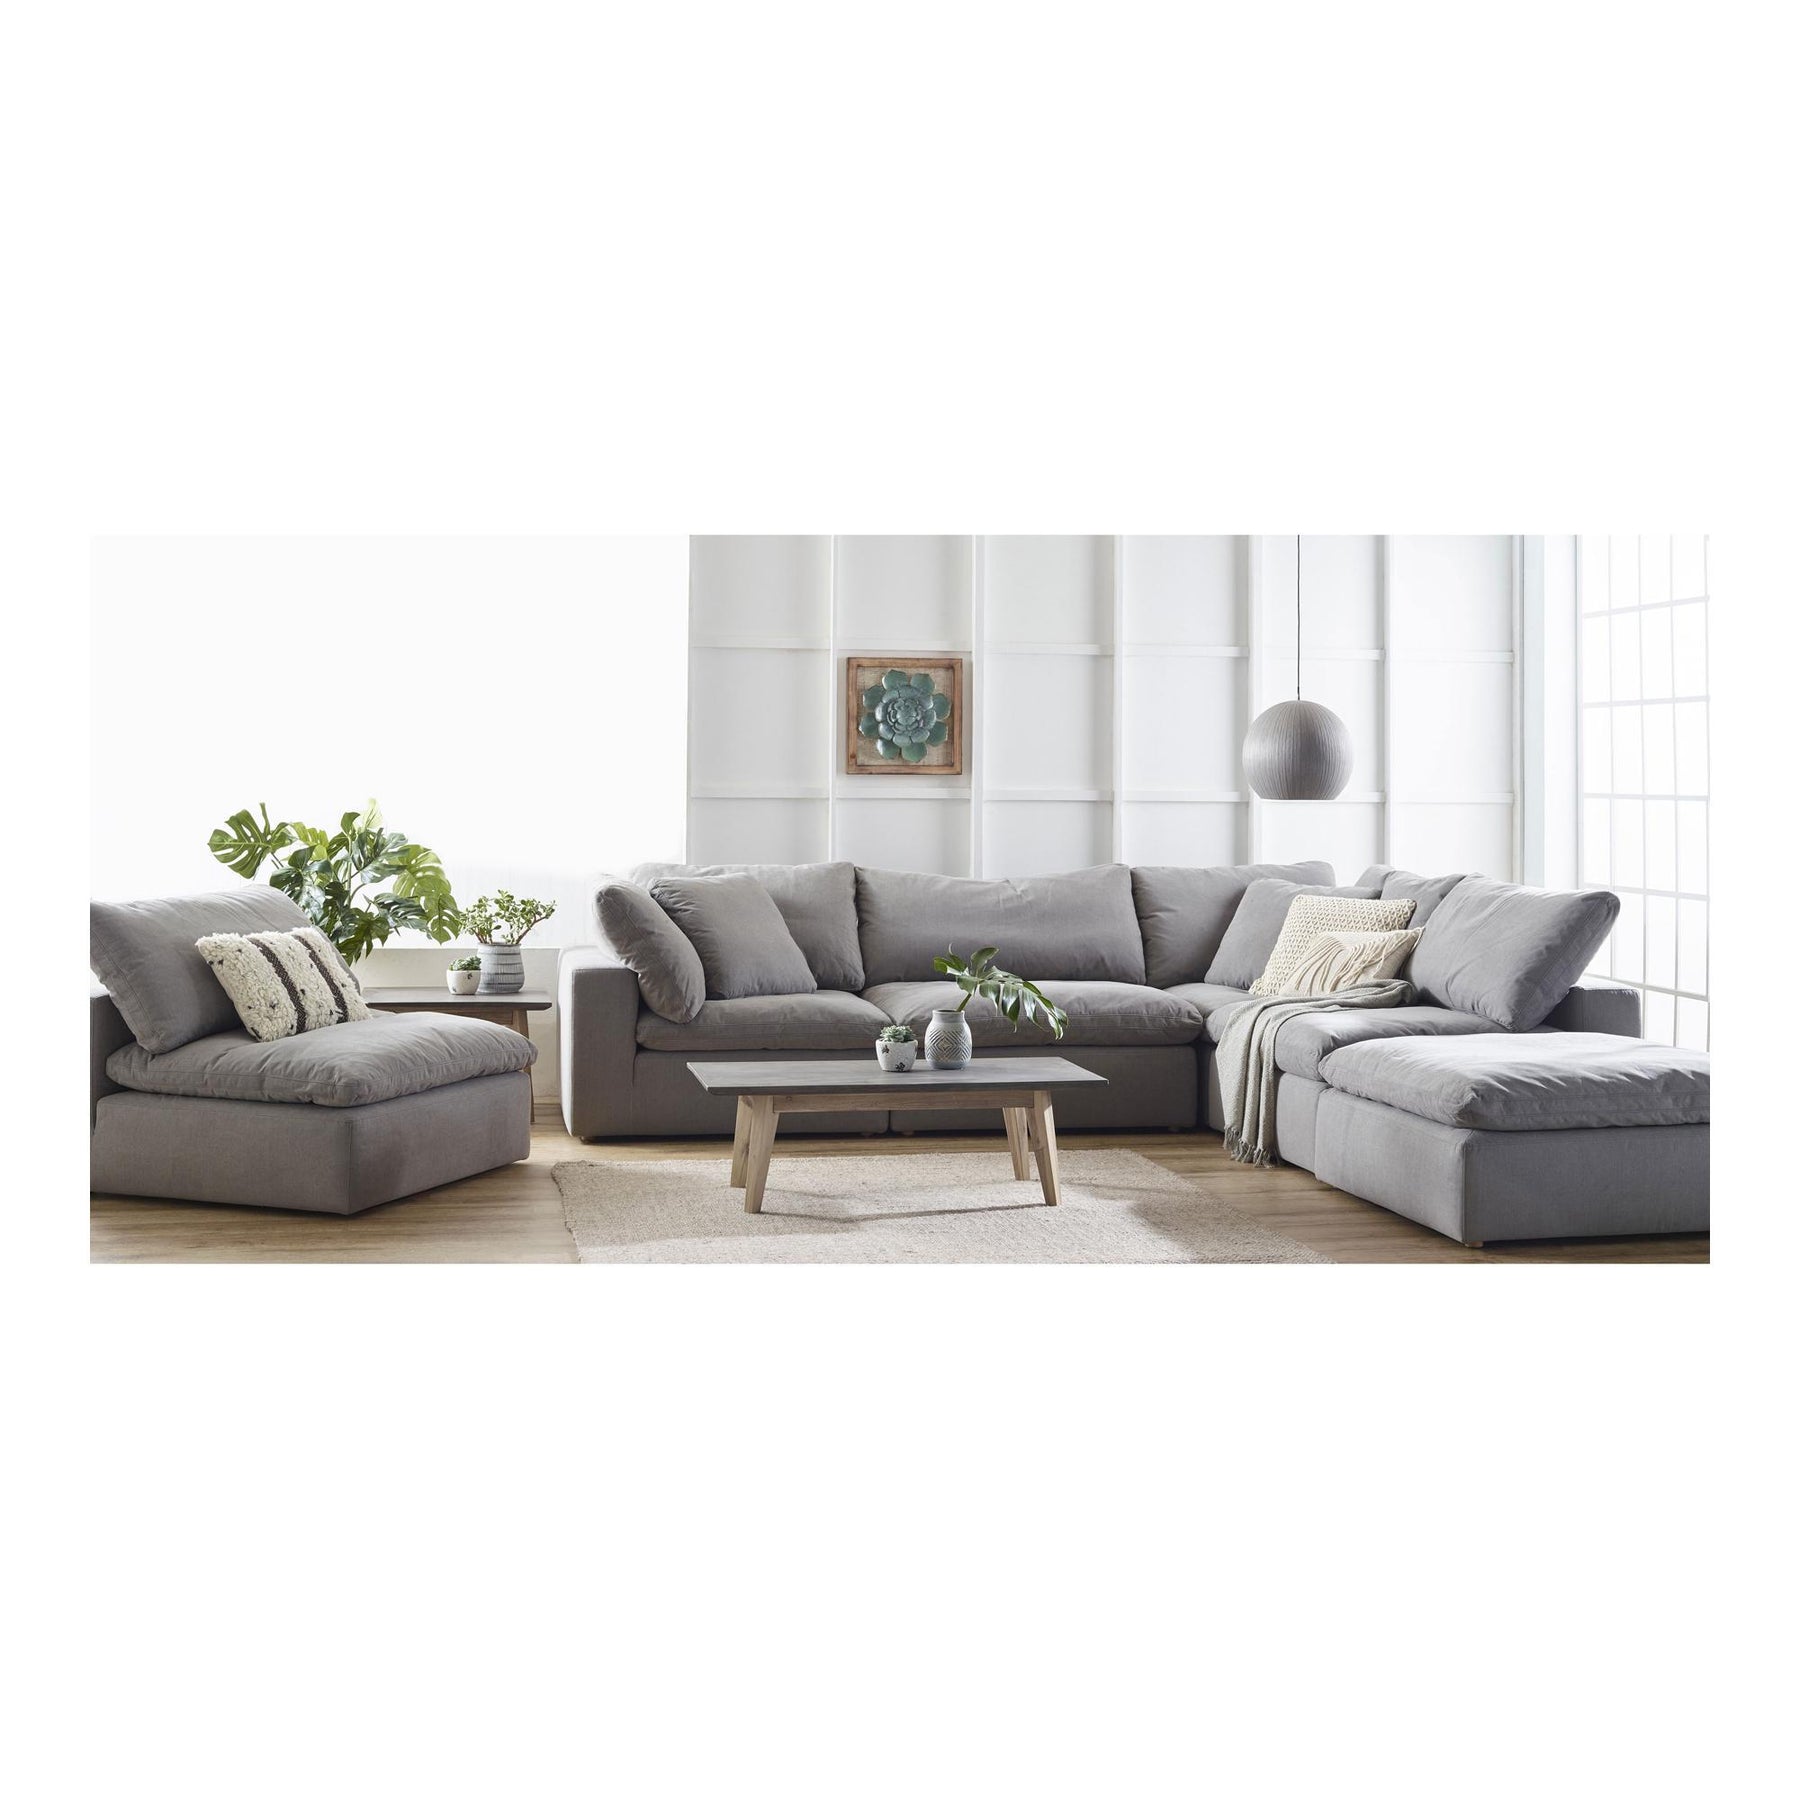 Moe's Home Collection Clay Modular Sectional Livesmart Fabric Light Grey - YJ-1003-29